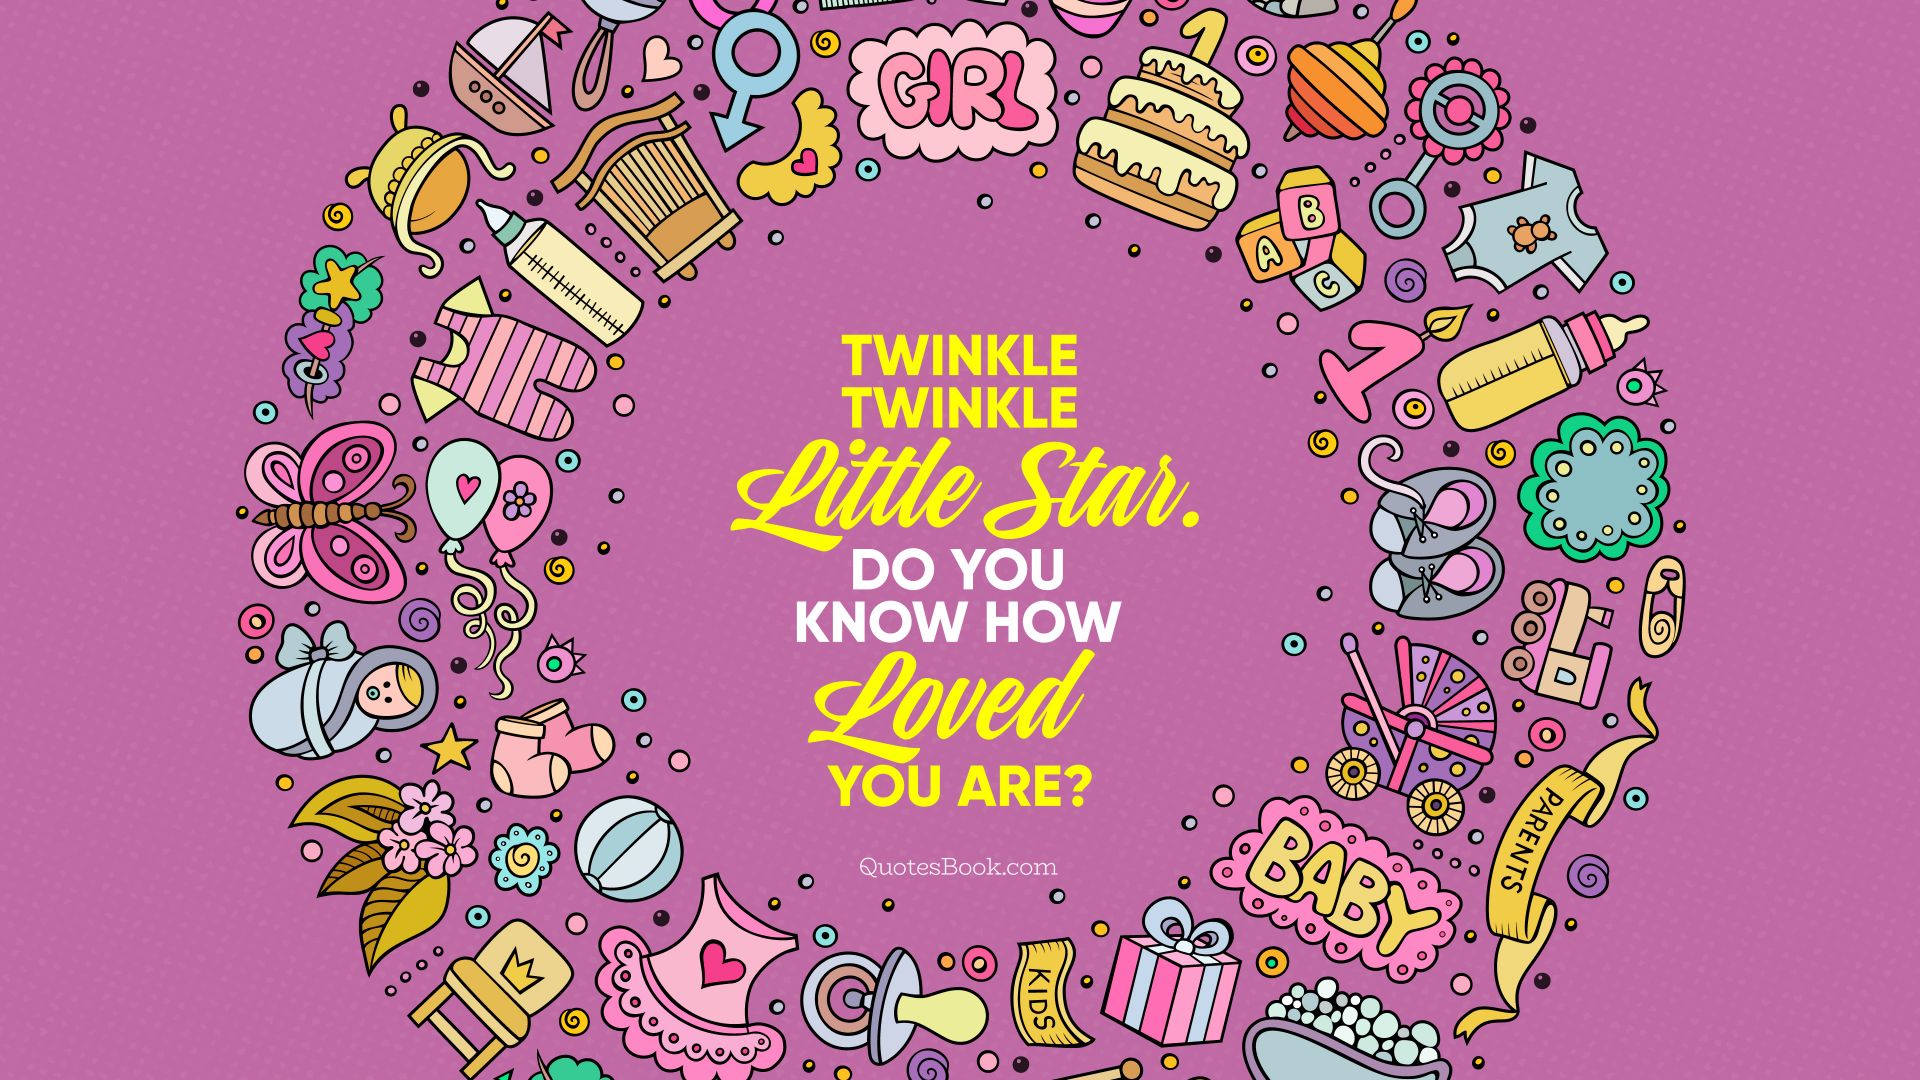 Twinkle twinkle little star. Do you know how loved you are?